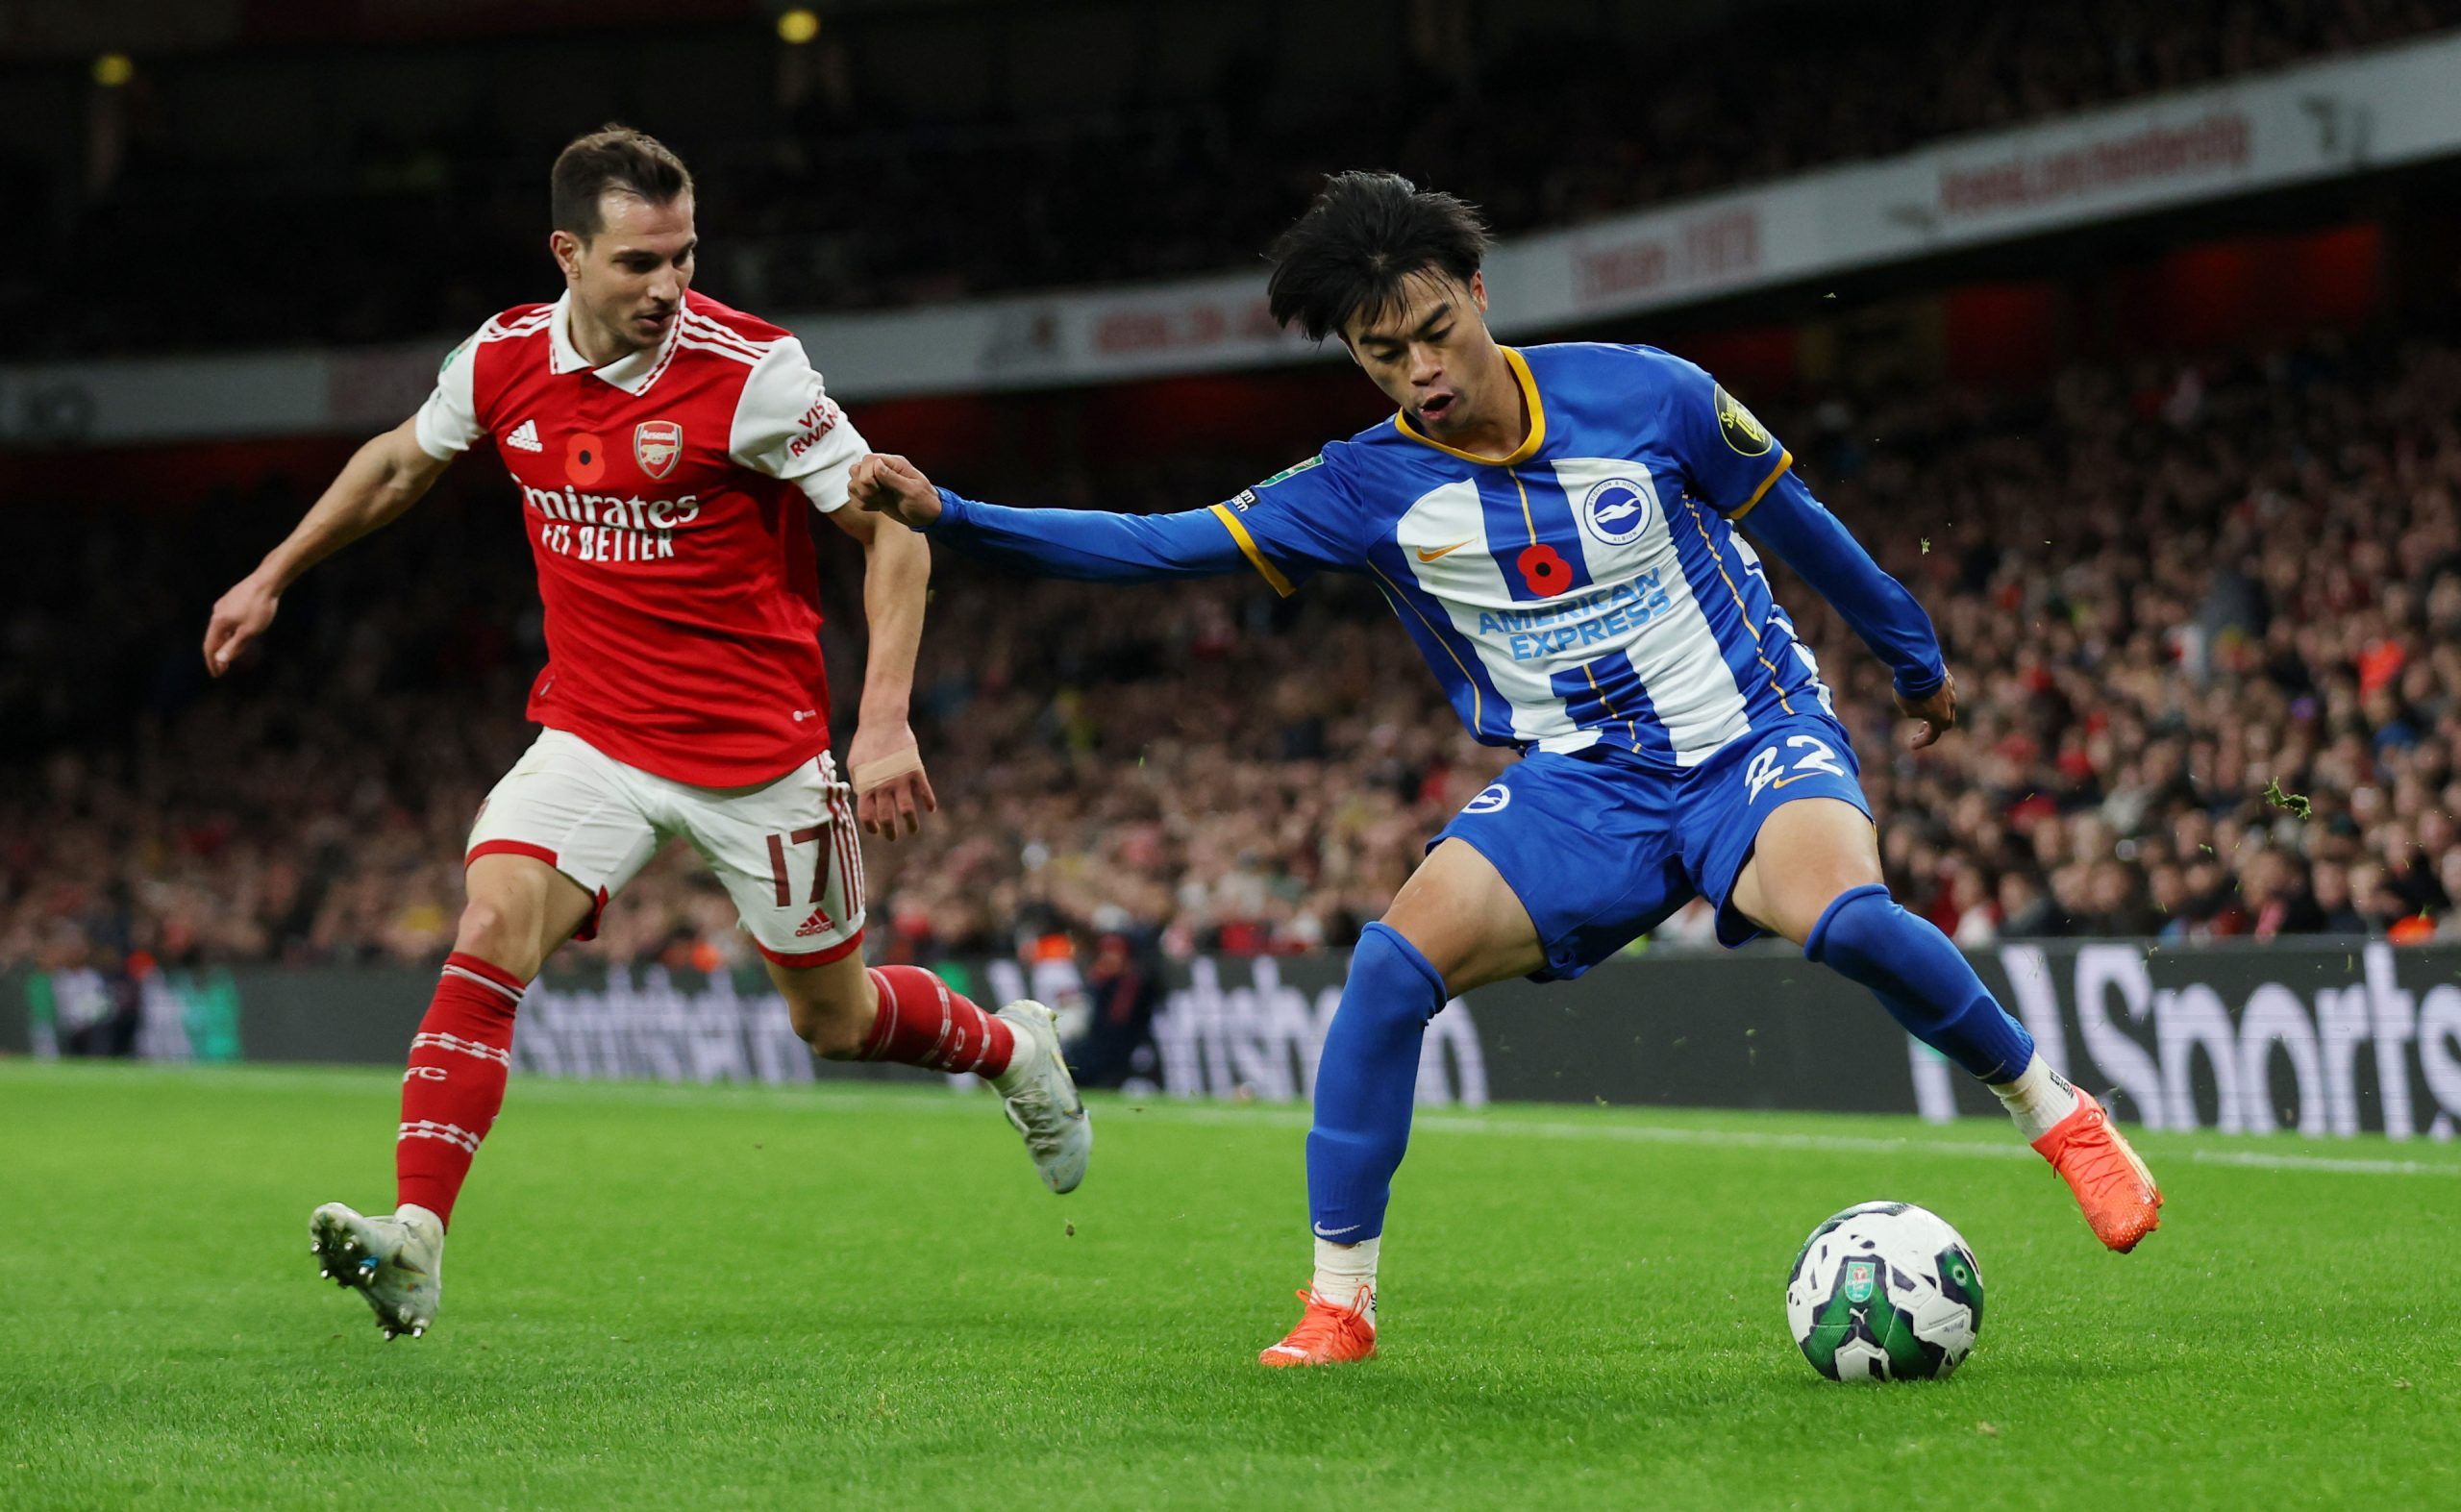 Soccer Football - Carabao Cup Third Round - Arsenal v Brighton &amp; Hove Albion - Emirates Stadium, London, Britain - November 9, 2022 Brighton &amp; Hove Albion's Kaoru Mitoma in action with Arsenal's Cedric Soares Action Images via Reuters/Matthew Childs EDITORIAL USE ONLY. No use with unauthorized audio, video, data, fixture lists, club/league logos or 'live' services. Online in-match use limited to 75 images, no video emulation. No use in betting, games or single club /league/player publica